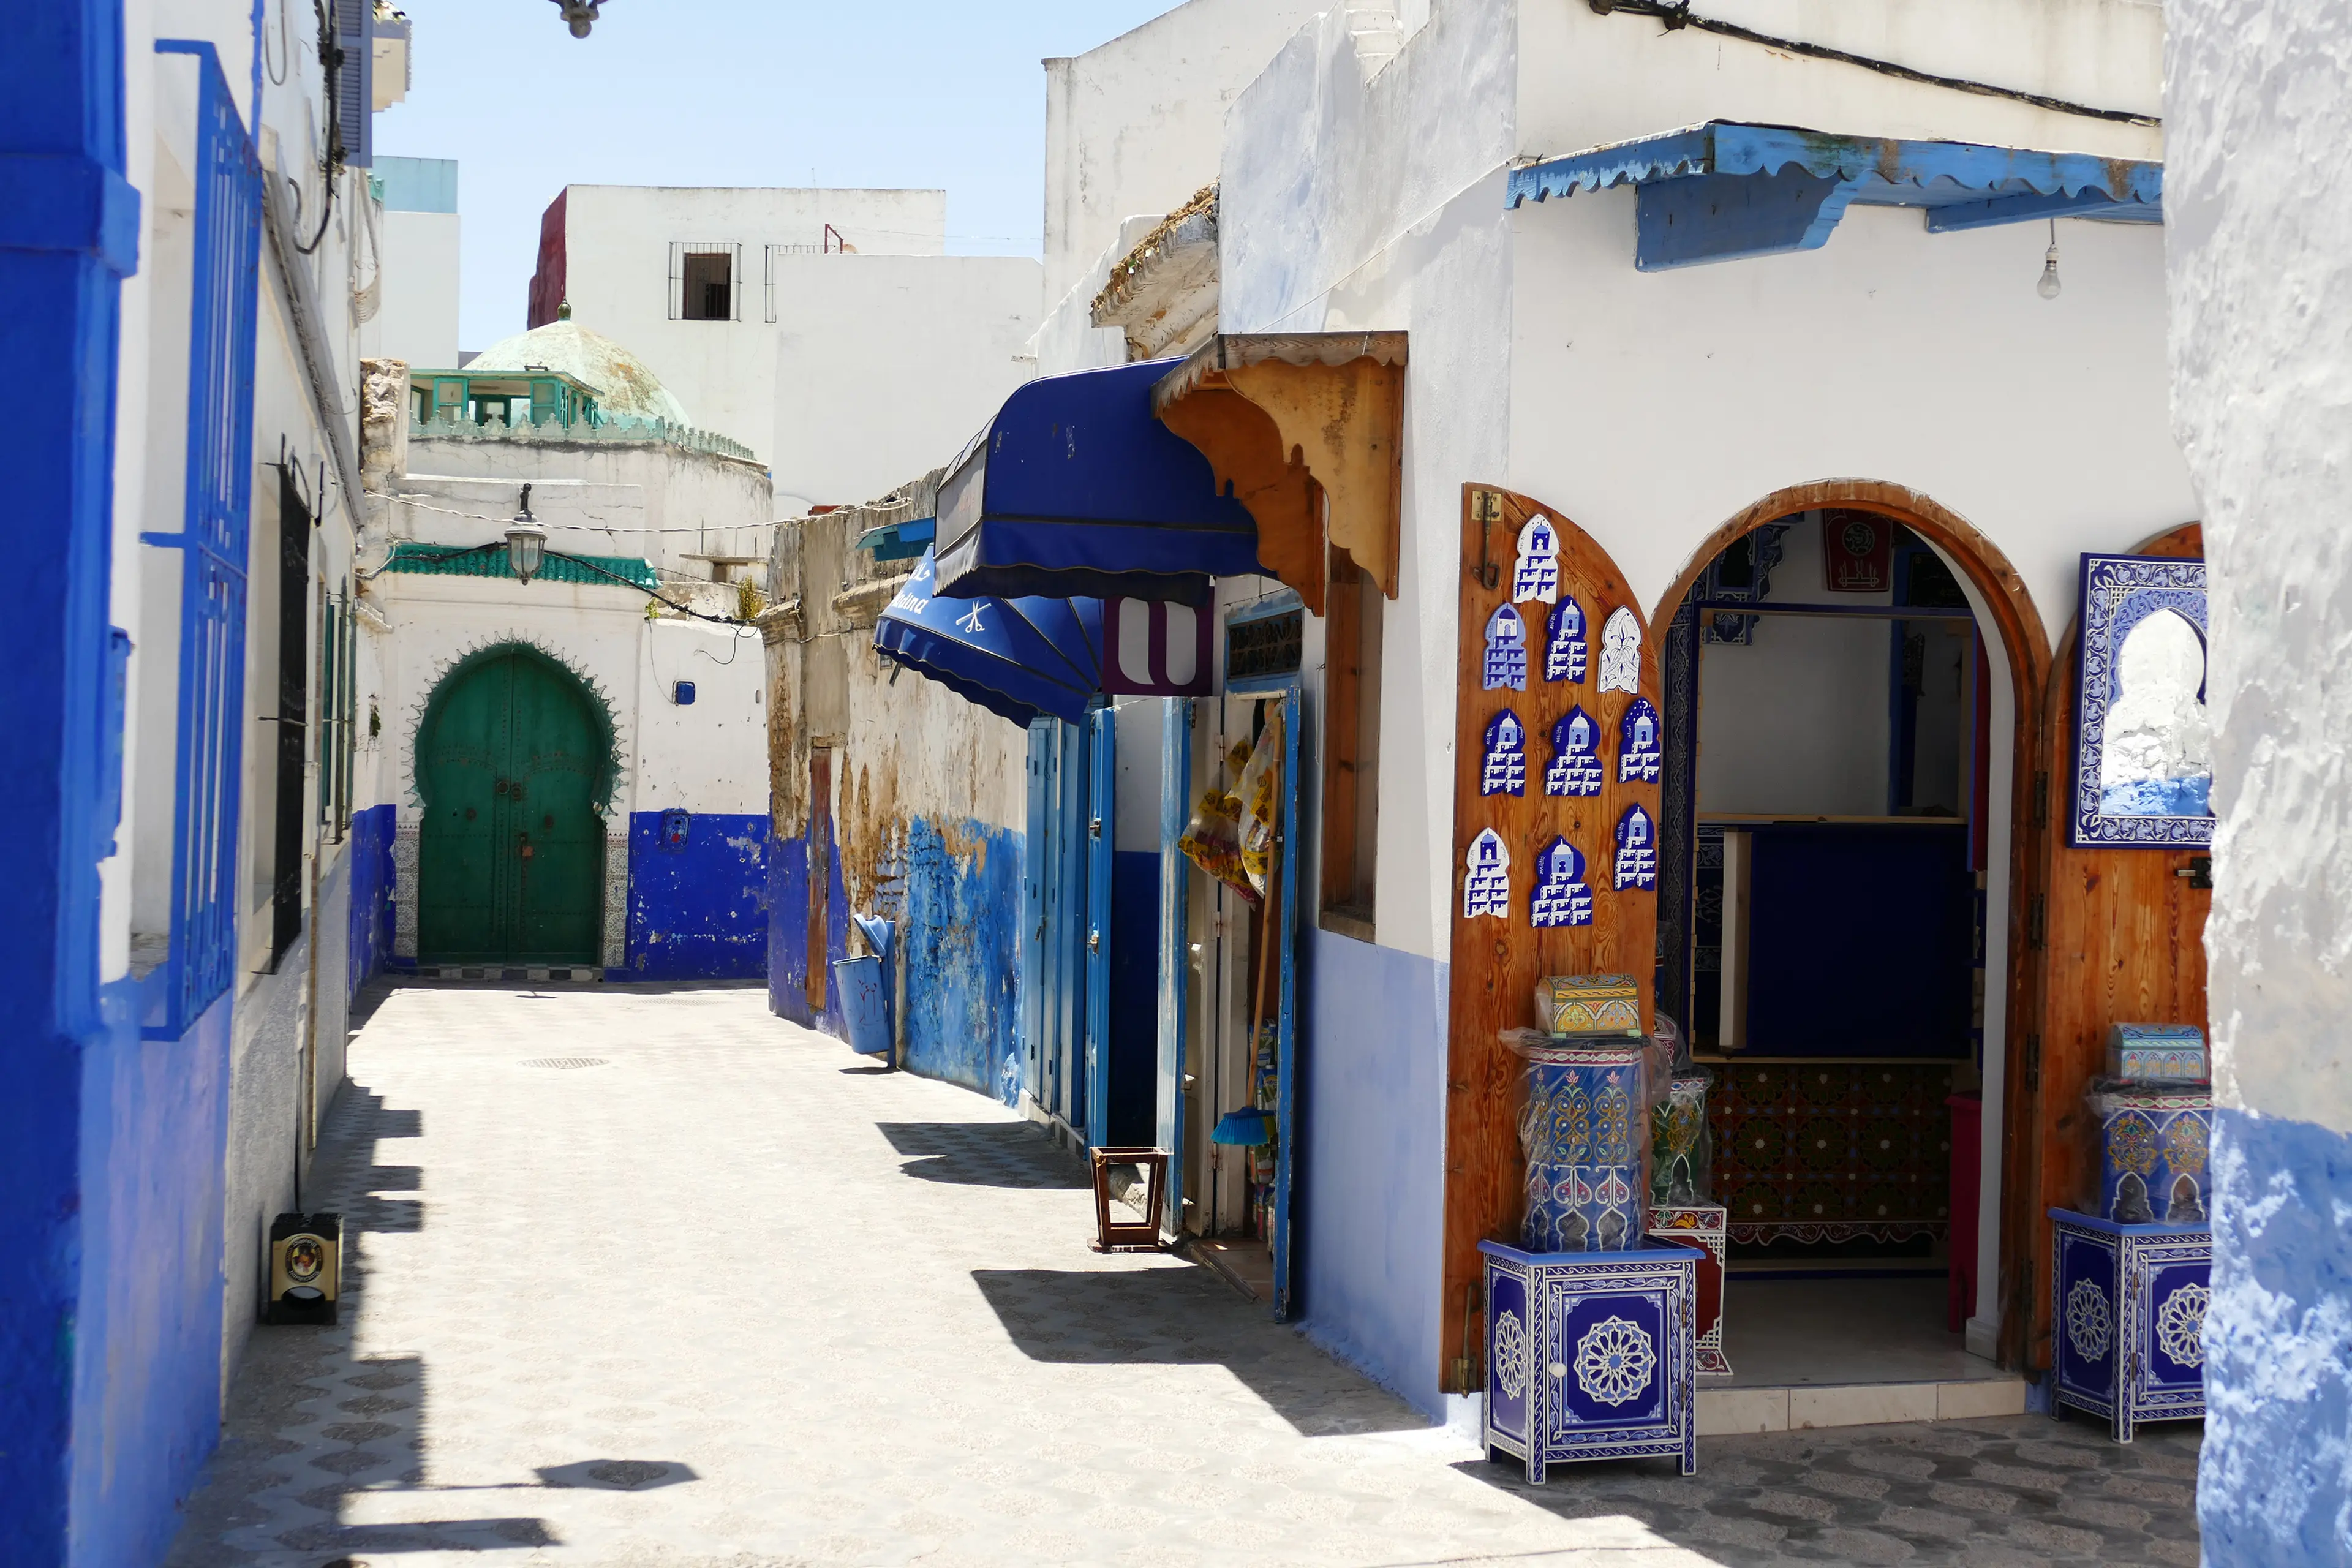 2-Day Asilah, Morocco Food, Wine & Nightlife Adventure with Friends